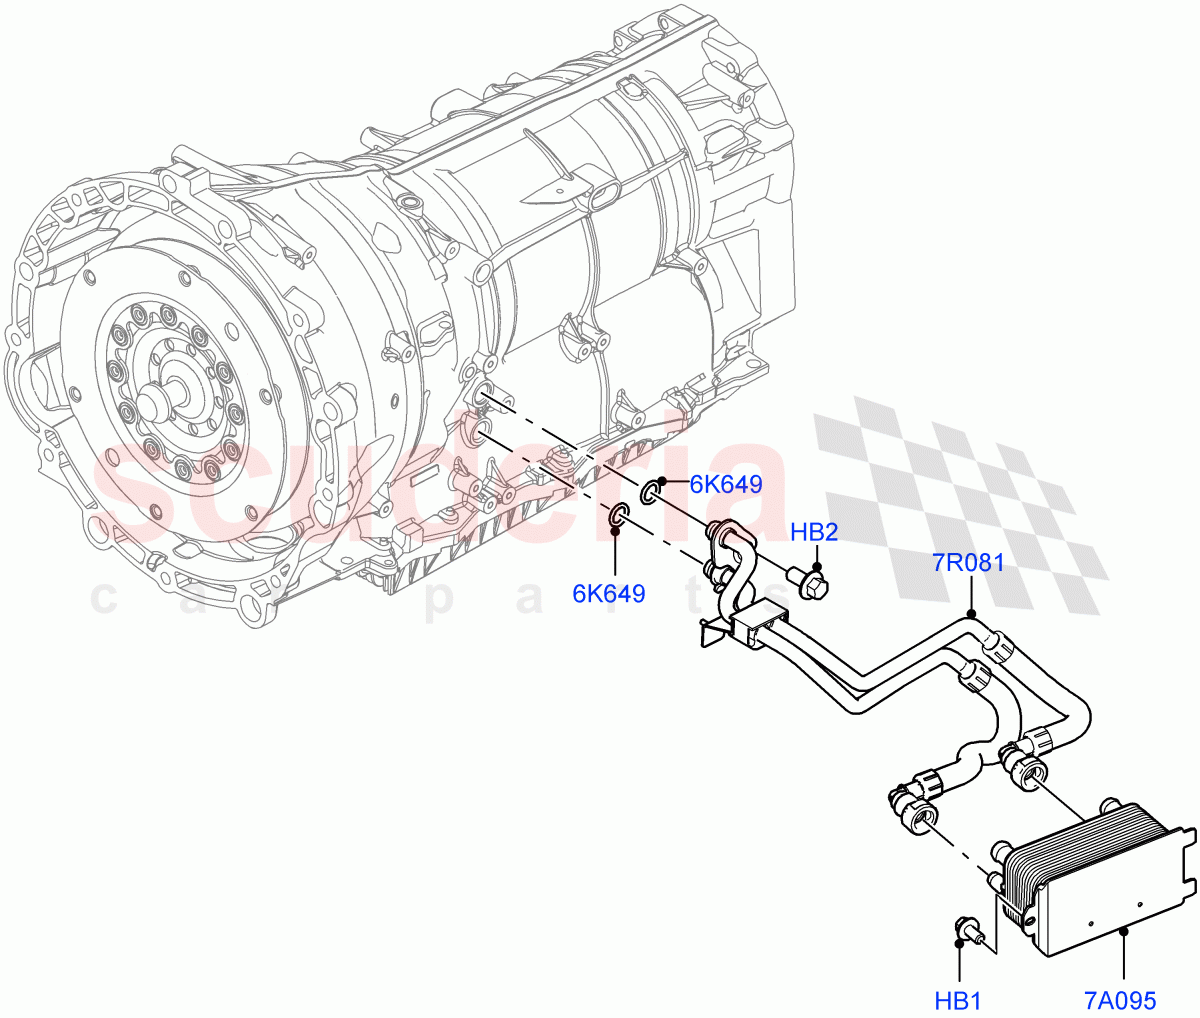 Transmission Cooling Systems(3.0L AJ20P6 Petrol High,8 Speed Auto Trans ZF 8HP76,3.0L AJ20D6 Diesel High)((V)FROMKA000001) of Land Rover Land Rover Range Rover Sport (2014+) [3.0 I6 Turbo Diesel AJ20D6]